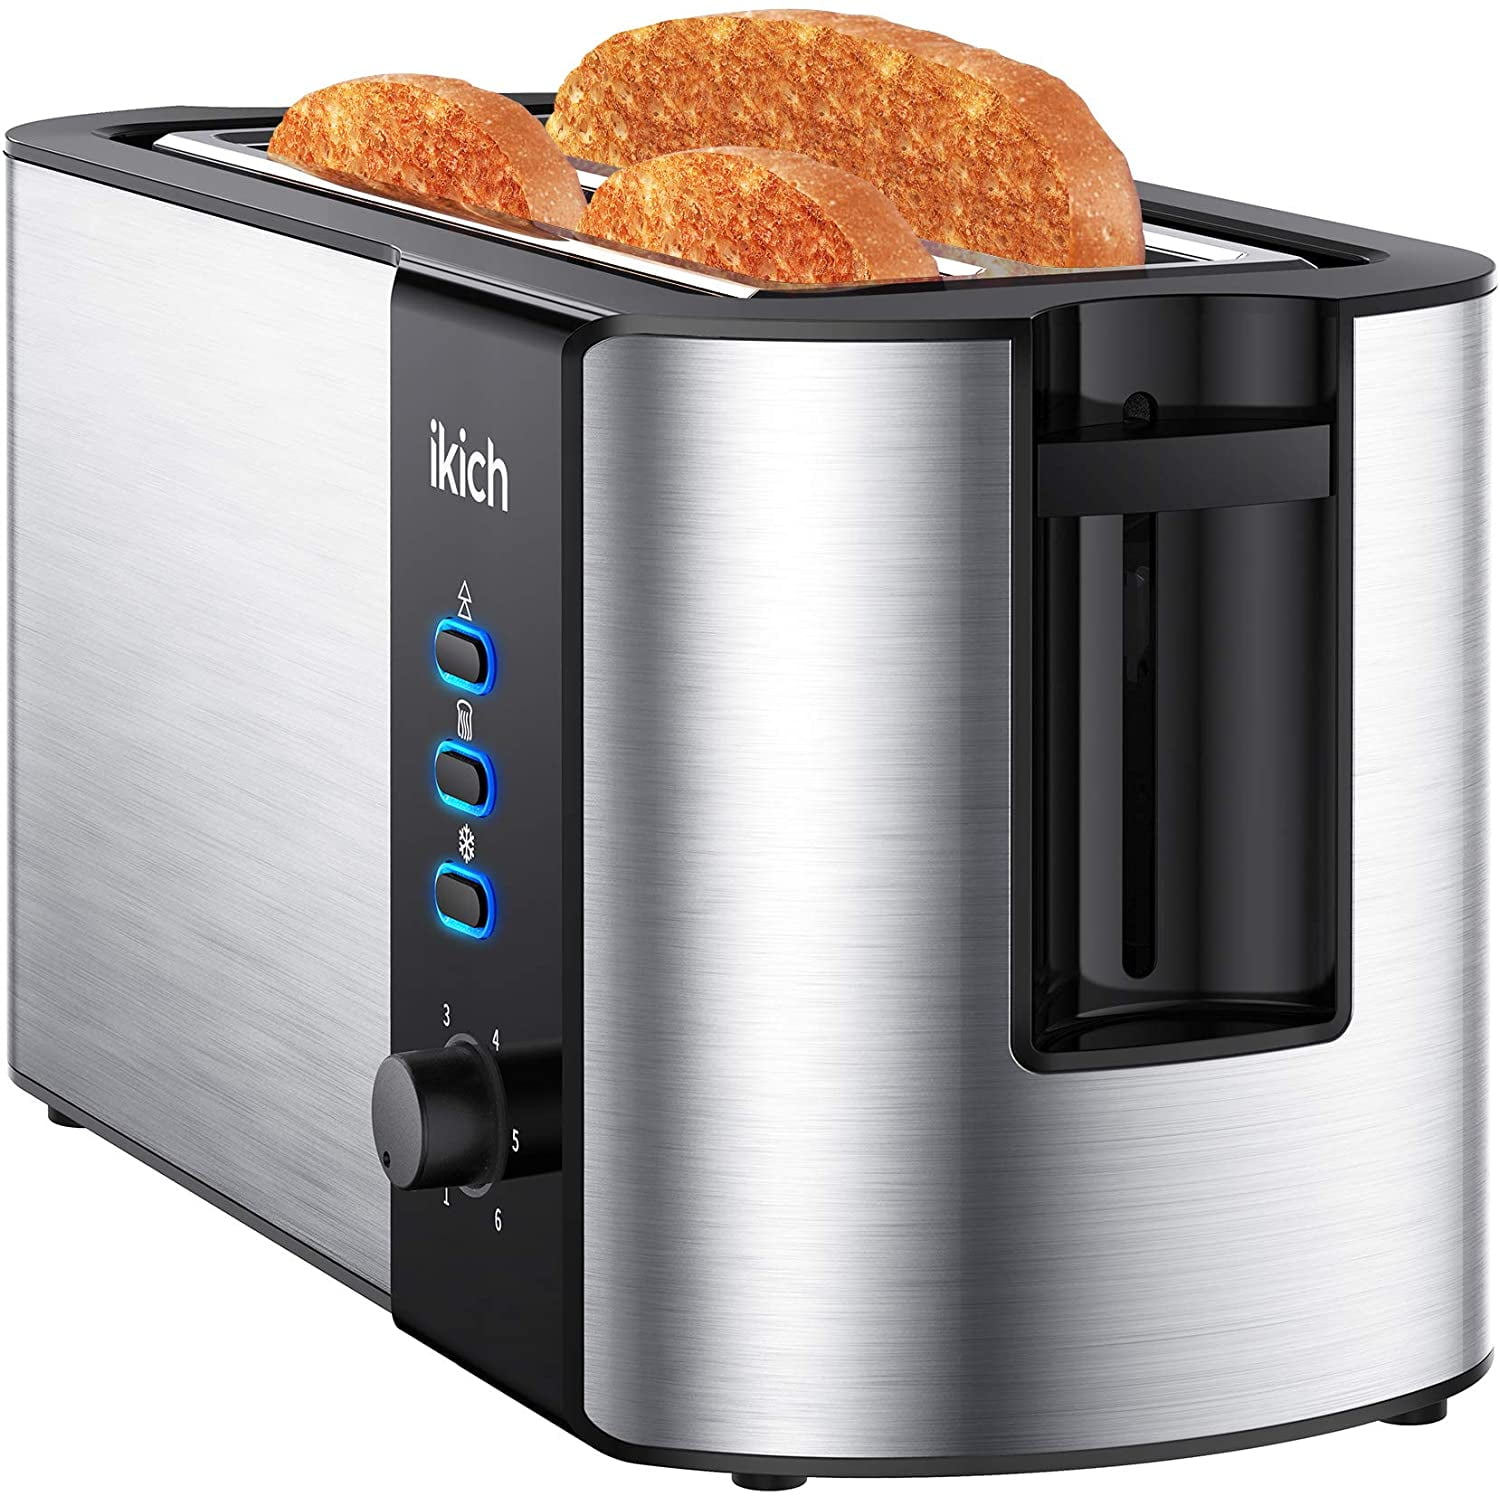 Mueller UltraToast Full Stainless Steel Toaster 4 Slice, Long Extra-Wide  Slots with Removable Tray, Cancel/Defrost/Reheat Functions, 6 Browning  Levels with LED Display 